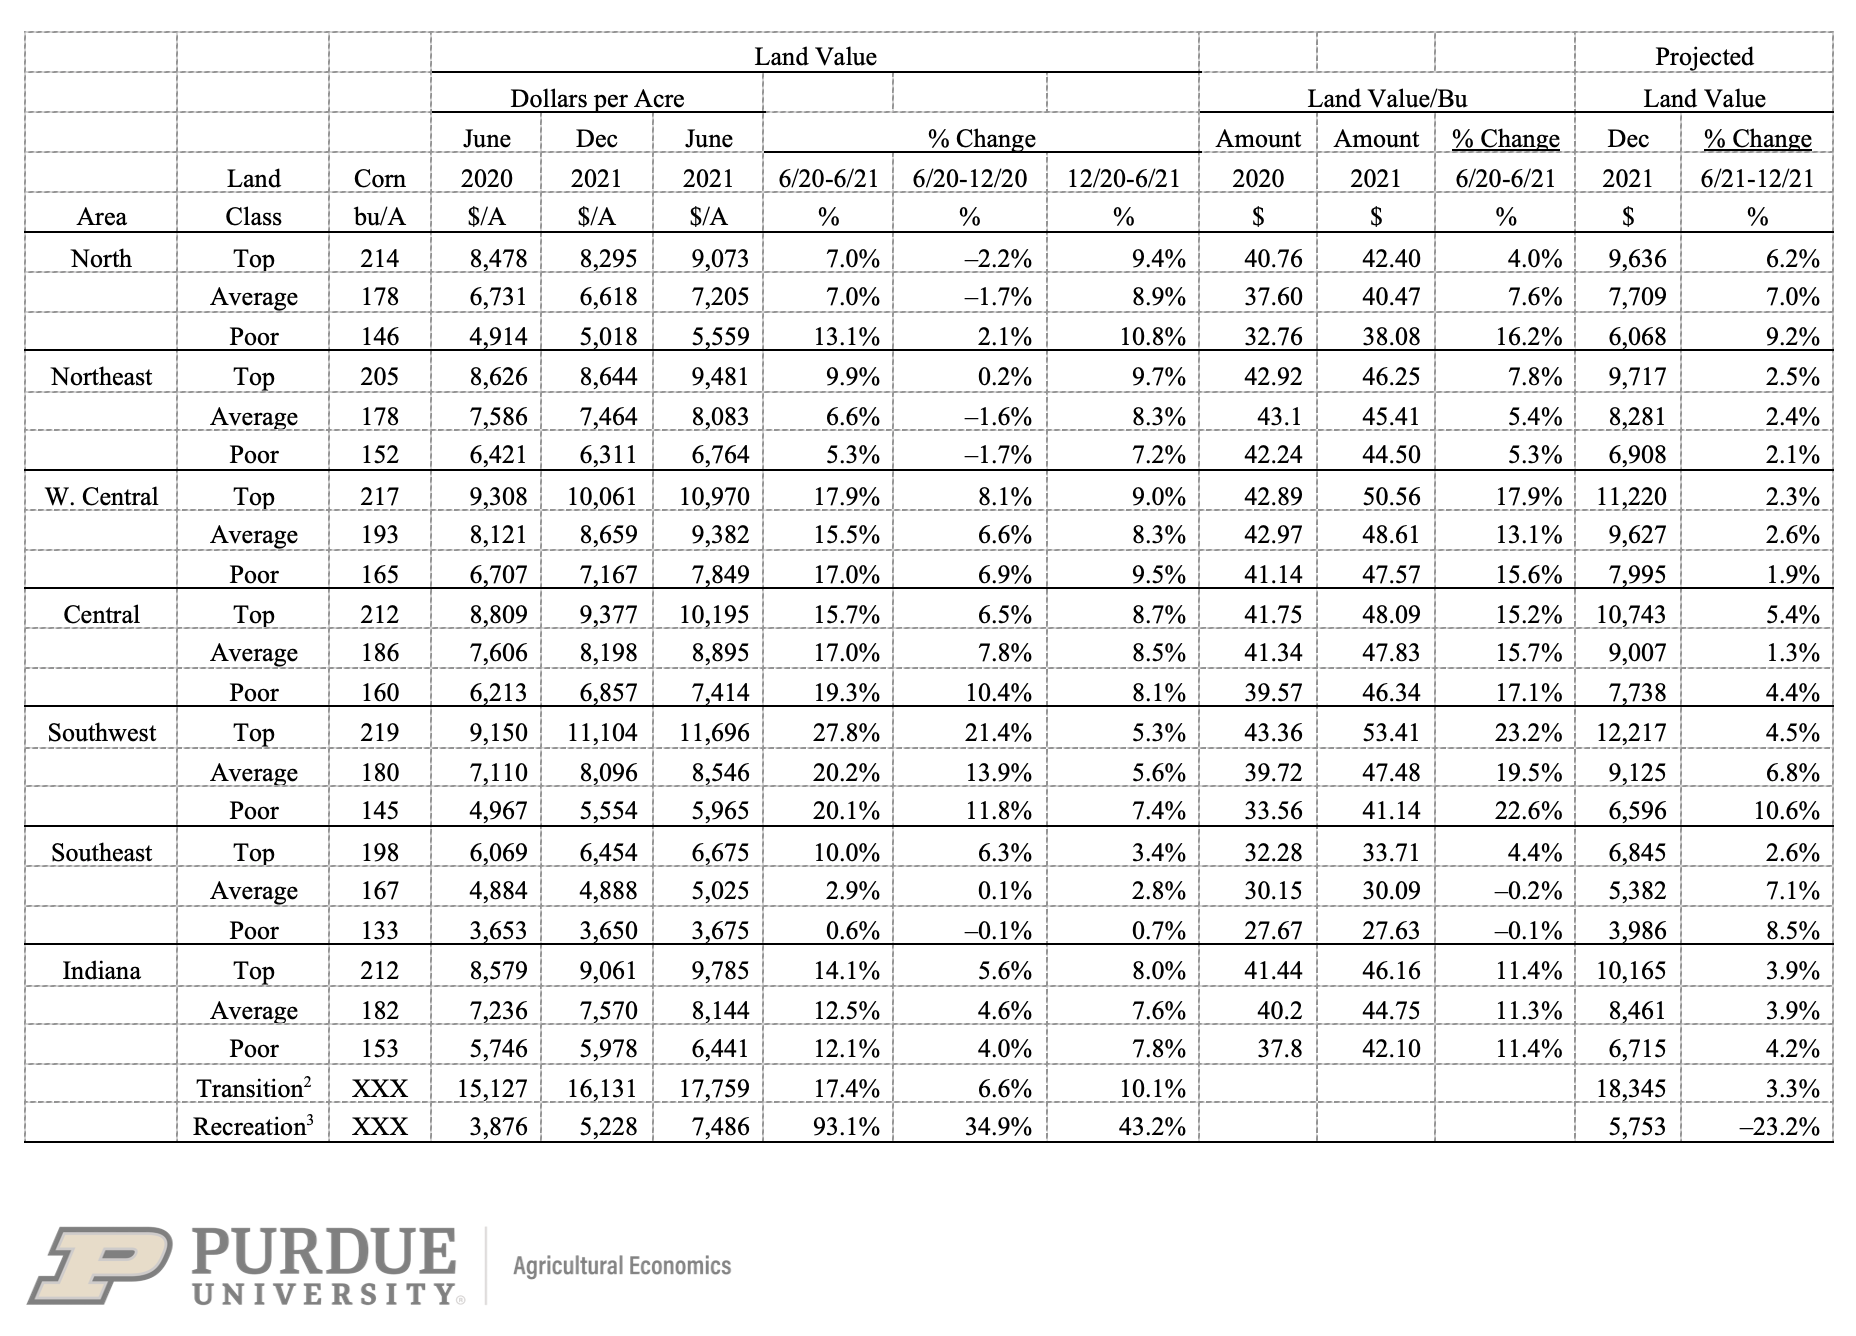 Table 1: Average estimated Indiana land value per acre (tillable, bare land), per bushel of corn yield, and percentage change by geographic area and land class, selected time periods, Purdue Land Value Survey, June 20211